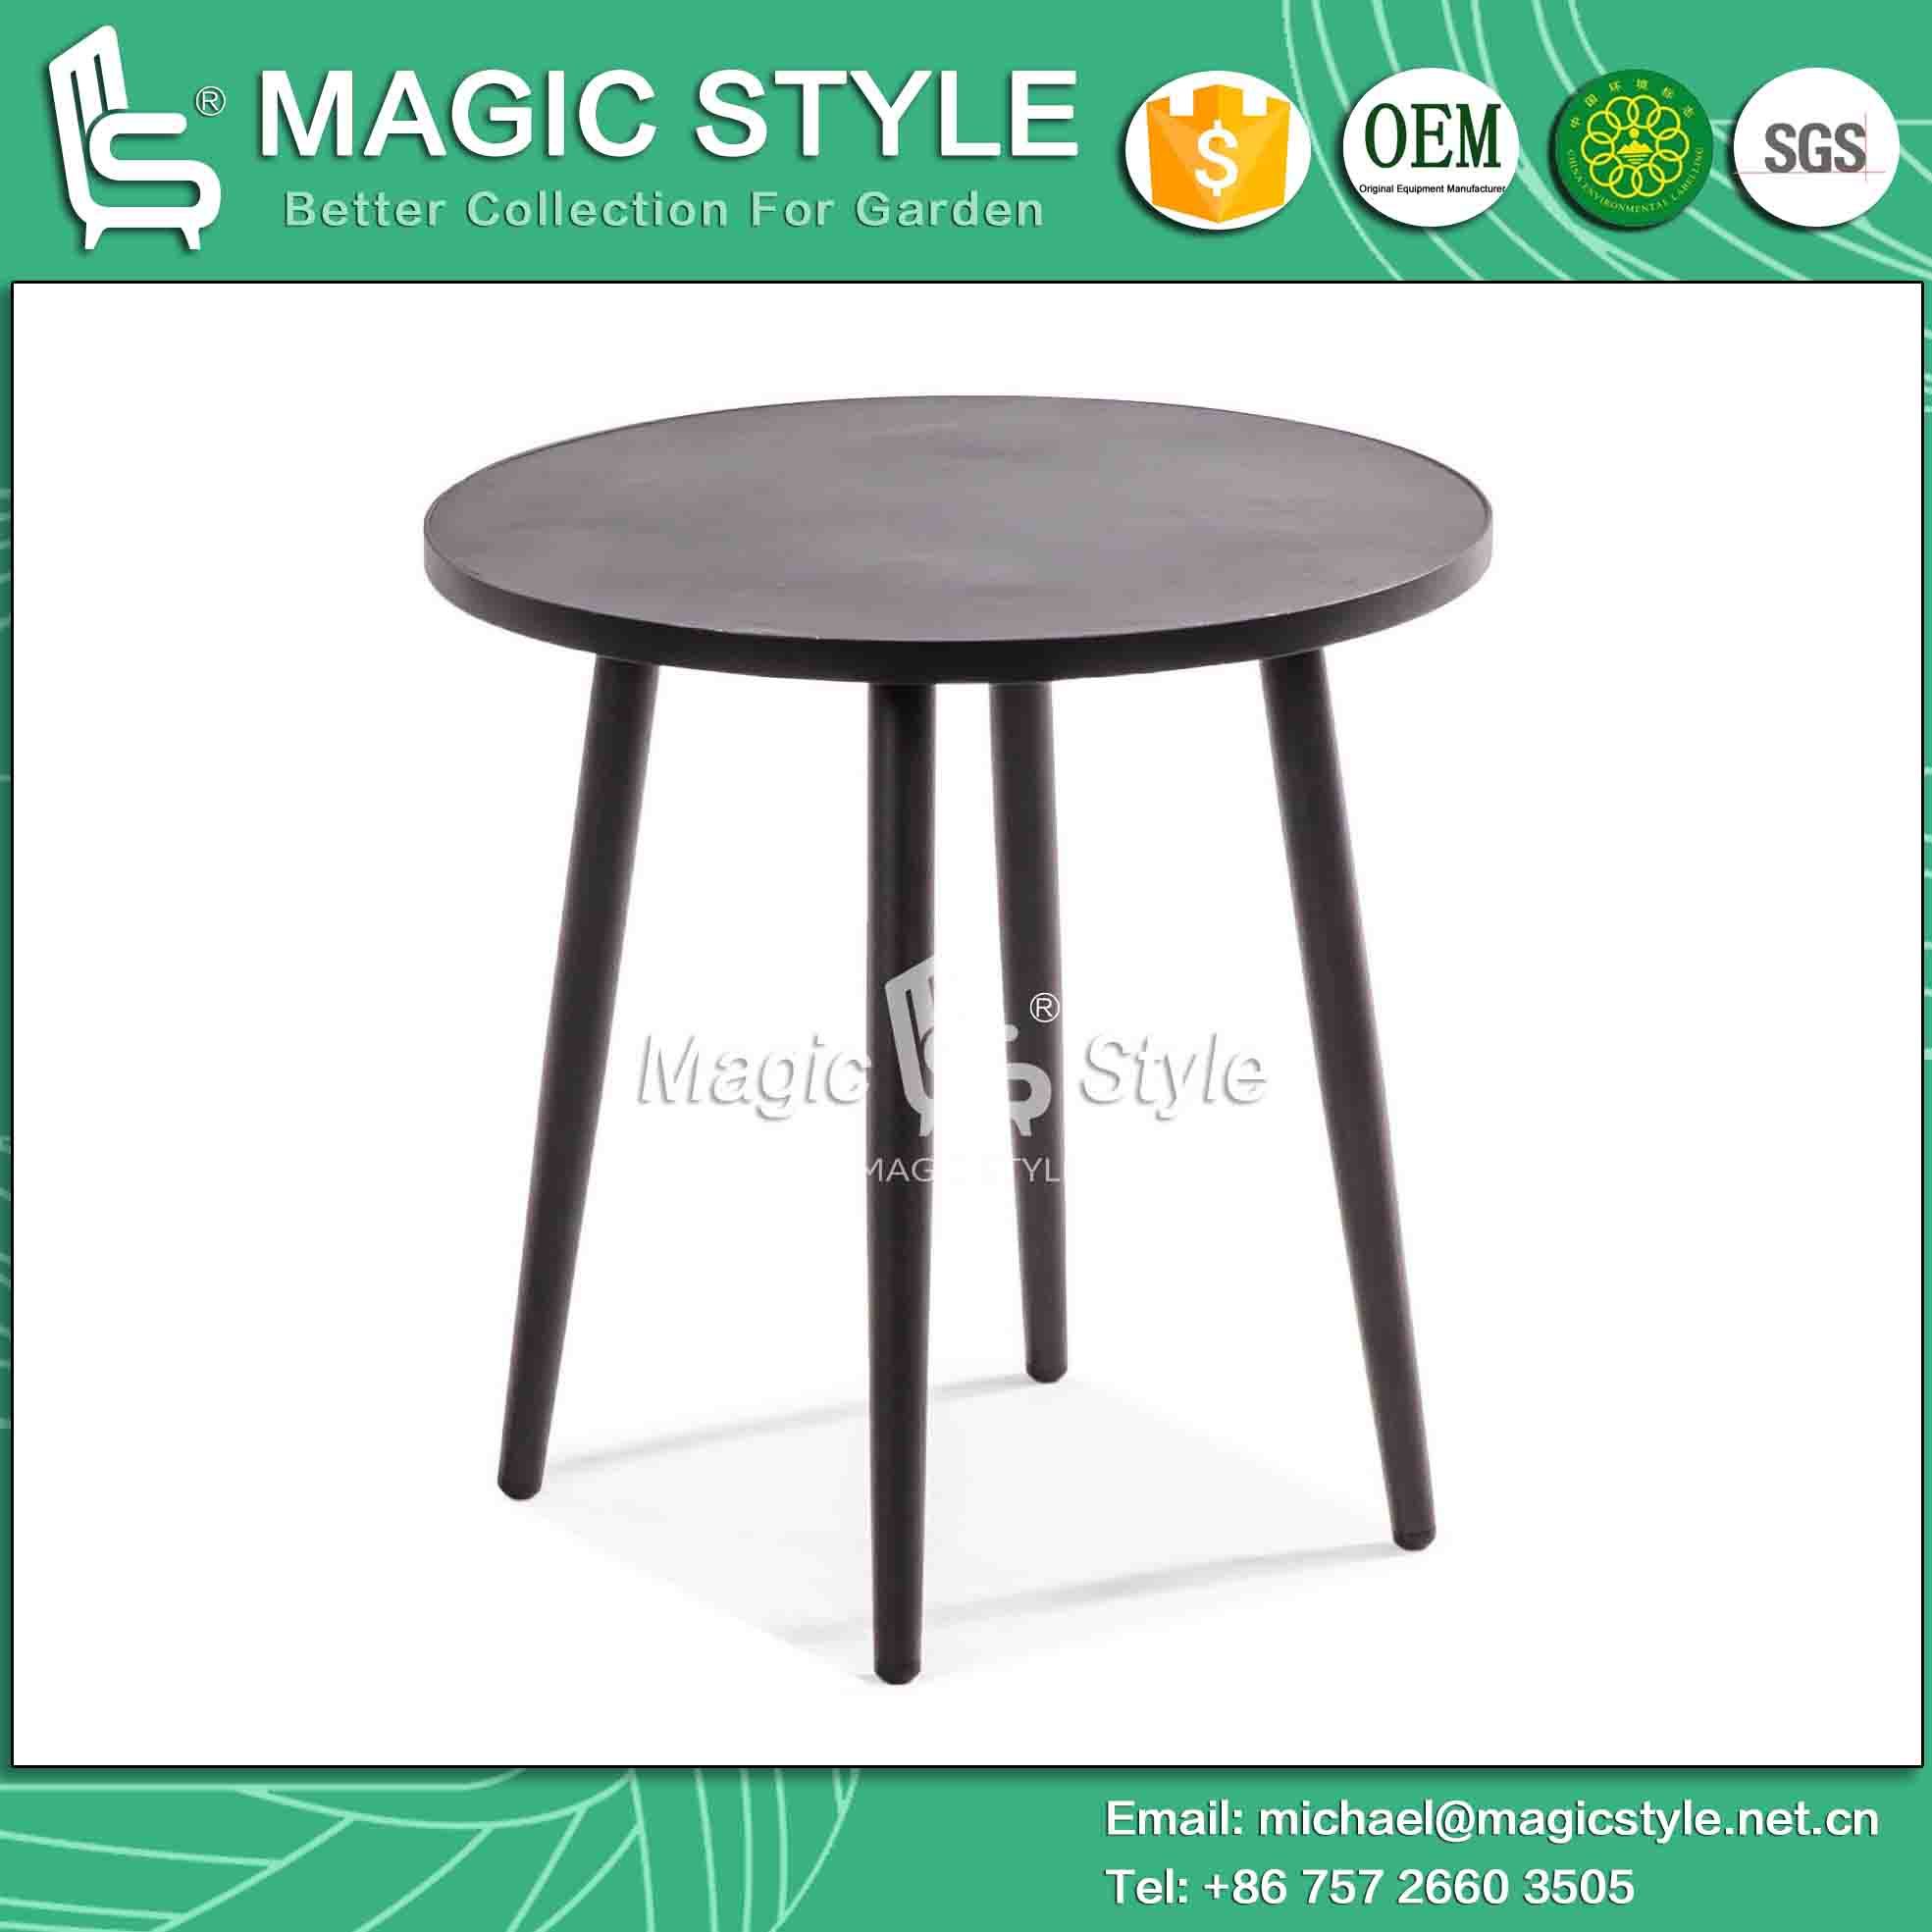 Aluminum Round Table Outdoor Round Table (Magic Style) Garden Side Table Cafe Club Table